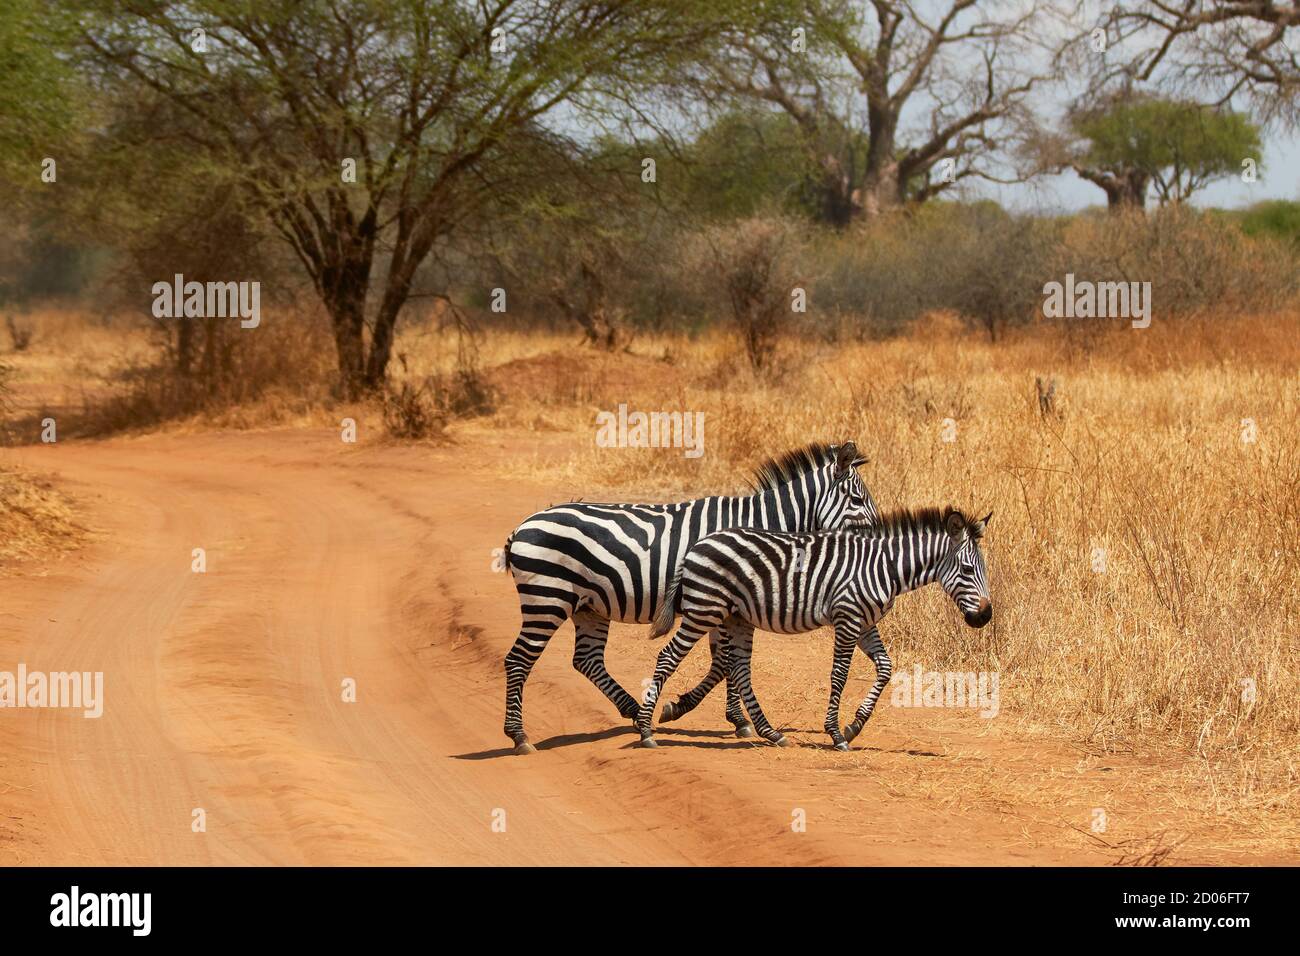 Two zebra's cross a dirty red road inside the Serengeti National Park, Tanzania, Africa. Stock Photo